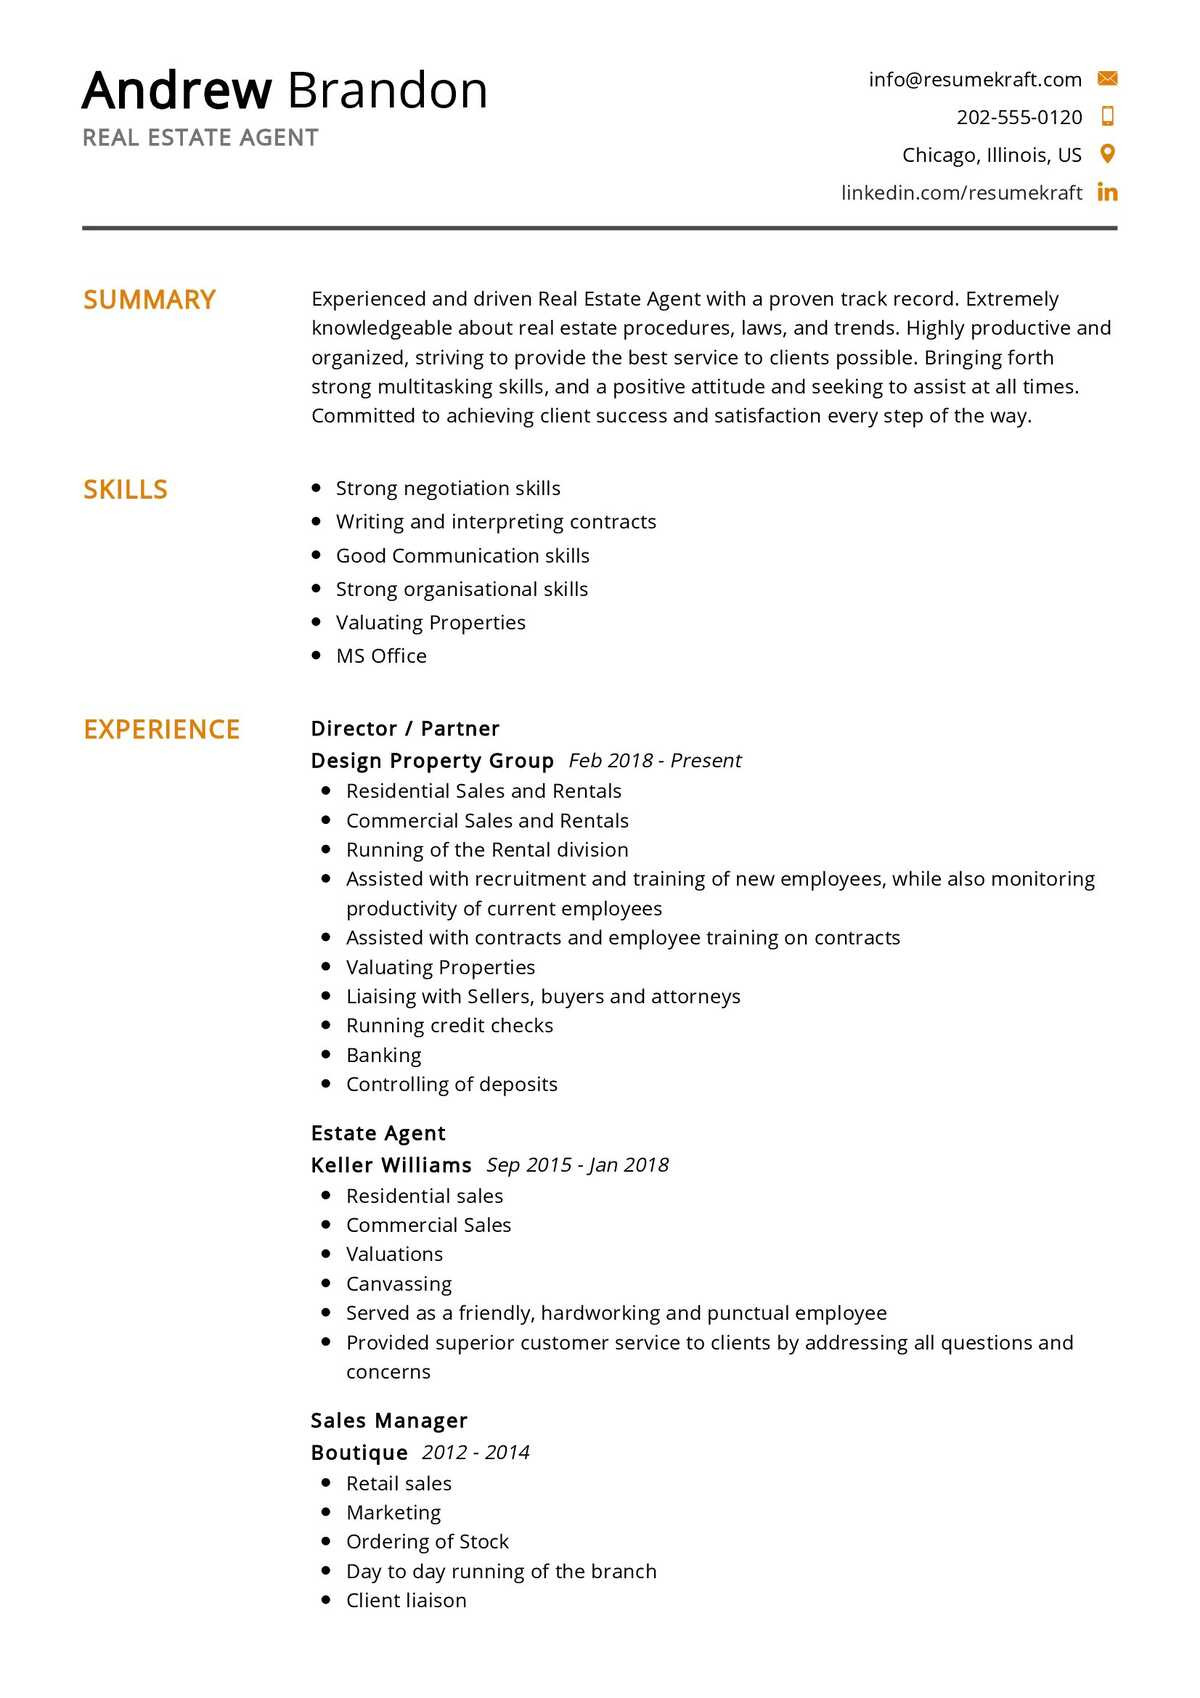 Sample Resume Objective Real Estate Agent Real Estate Agent Resume Sample 2022 Writing Tips – Resumekraft